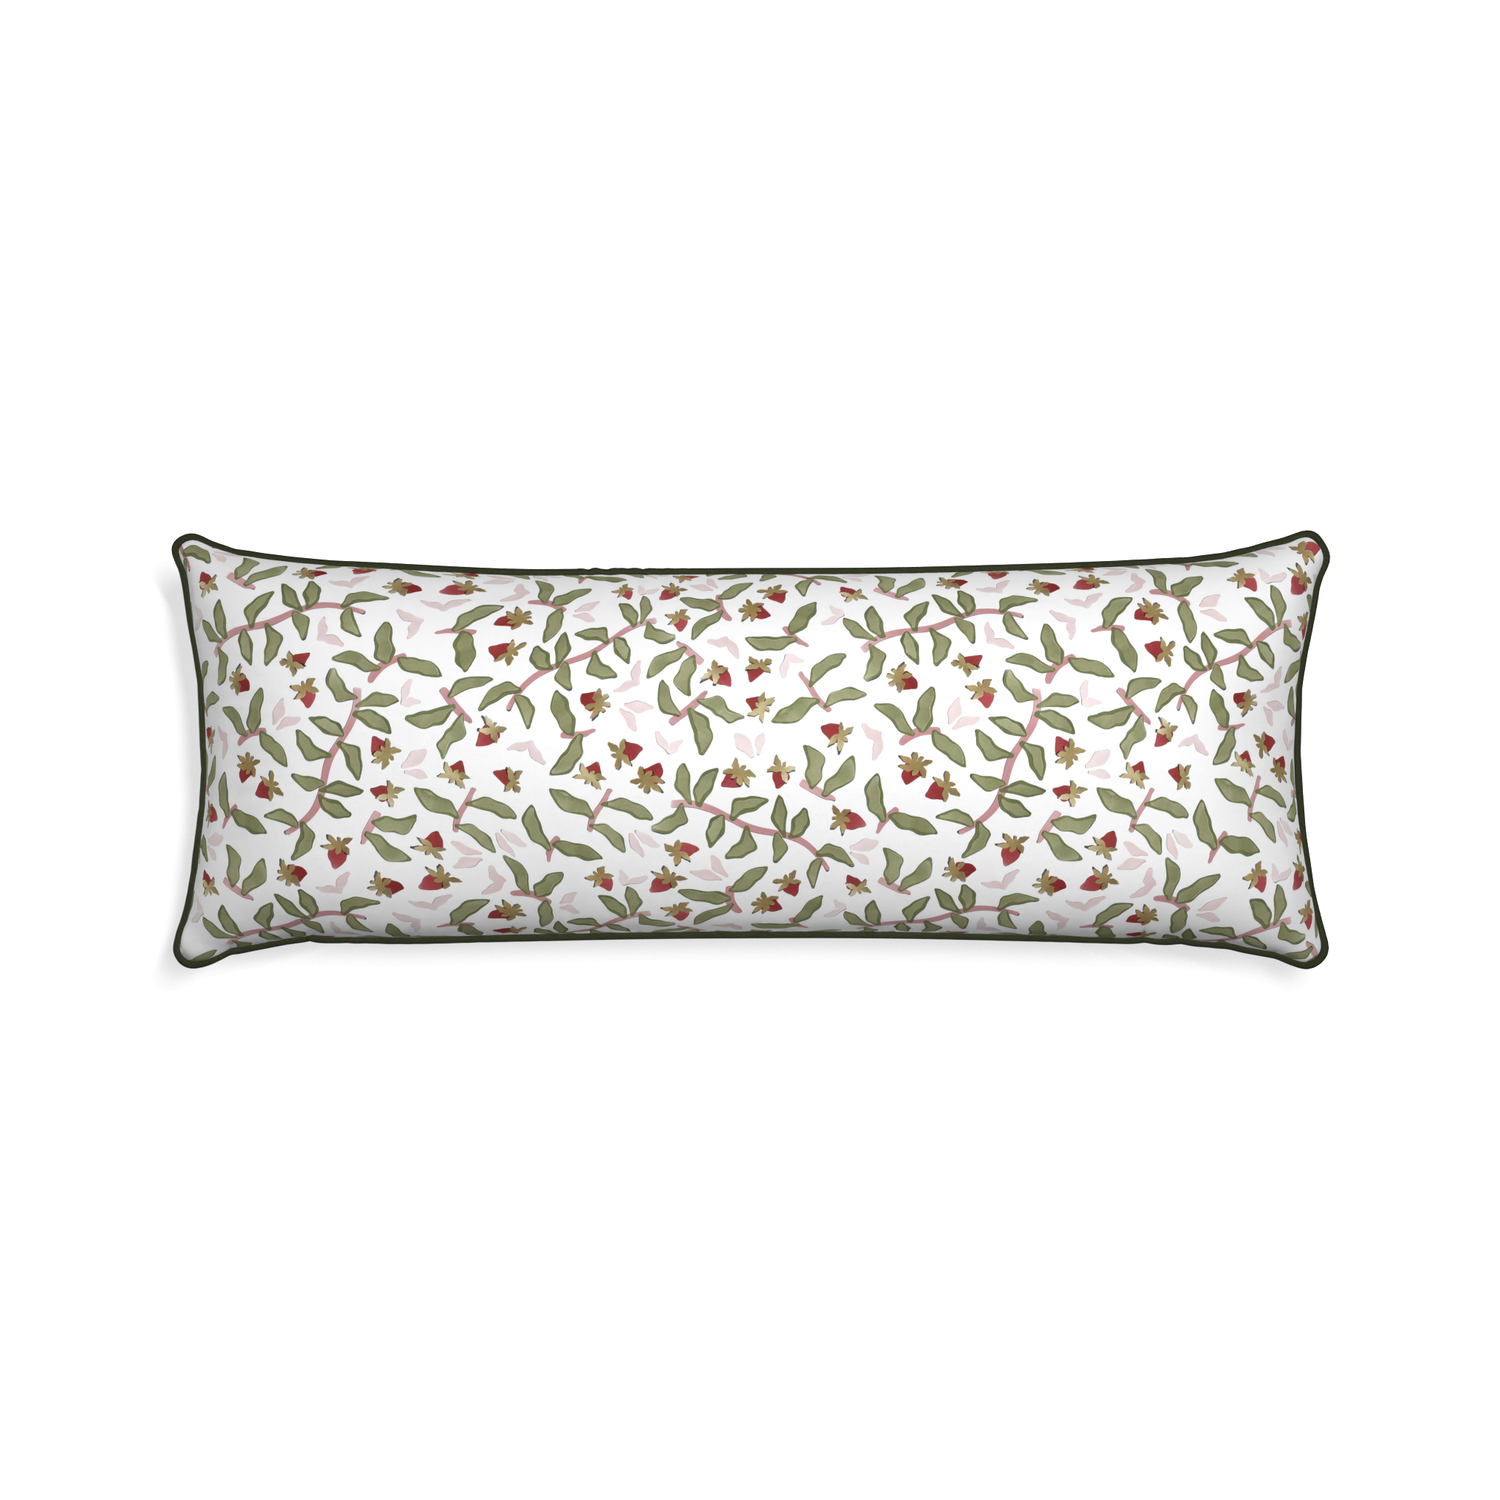 Xl-lumbar nellie custom strawberry & botanicalpillow with f piping on white background